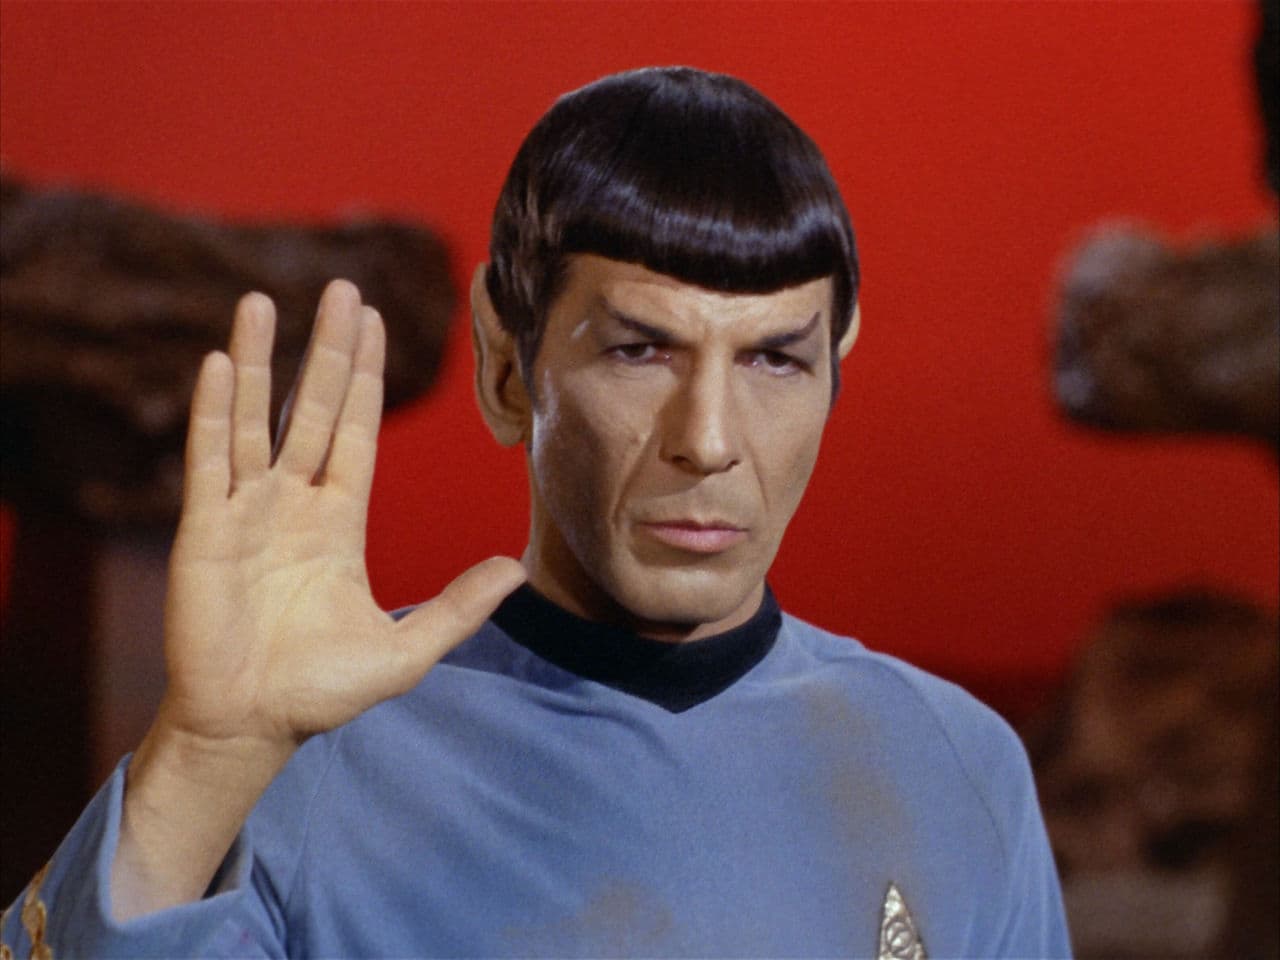 The Vulcan salute "live long and prosper" was Mr. Spock's most famous phrase.